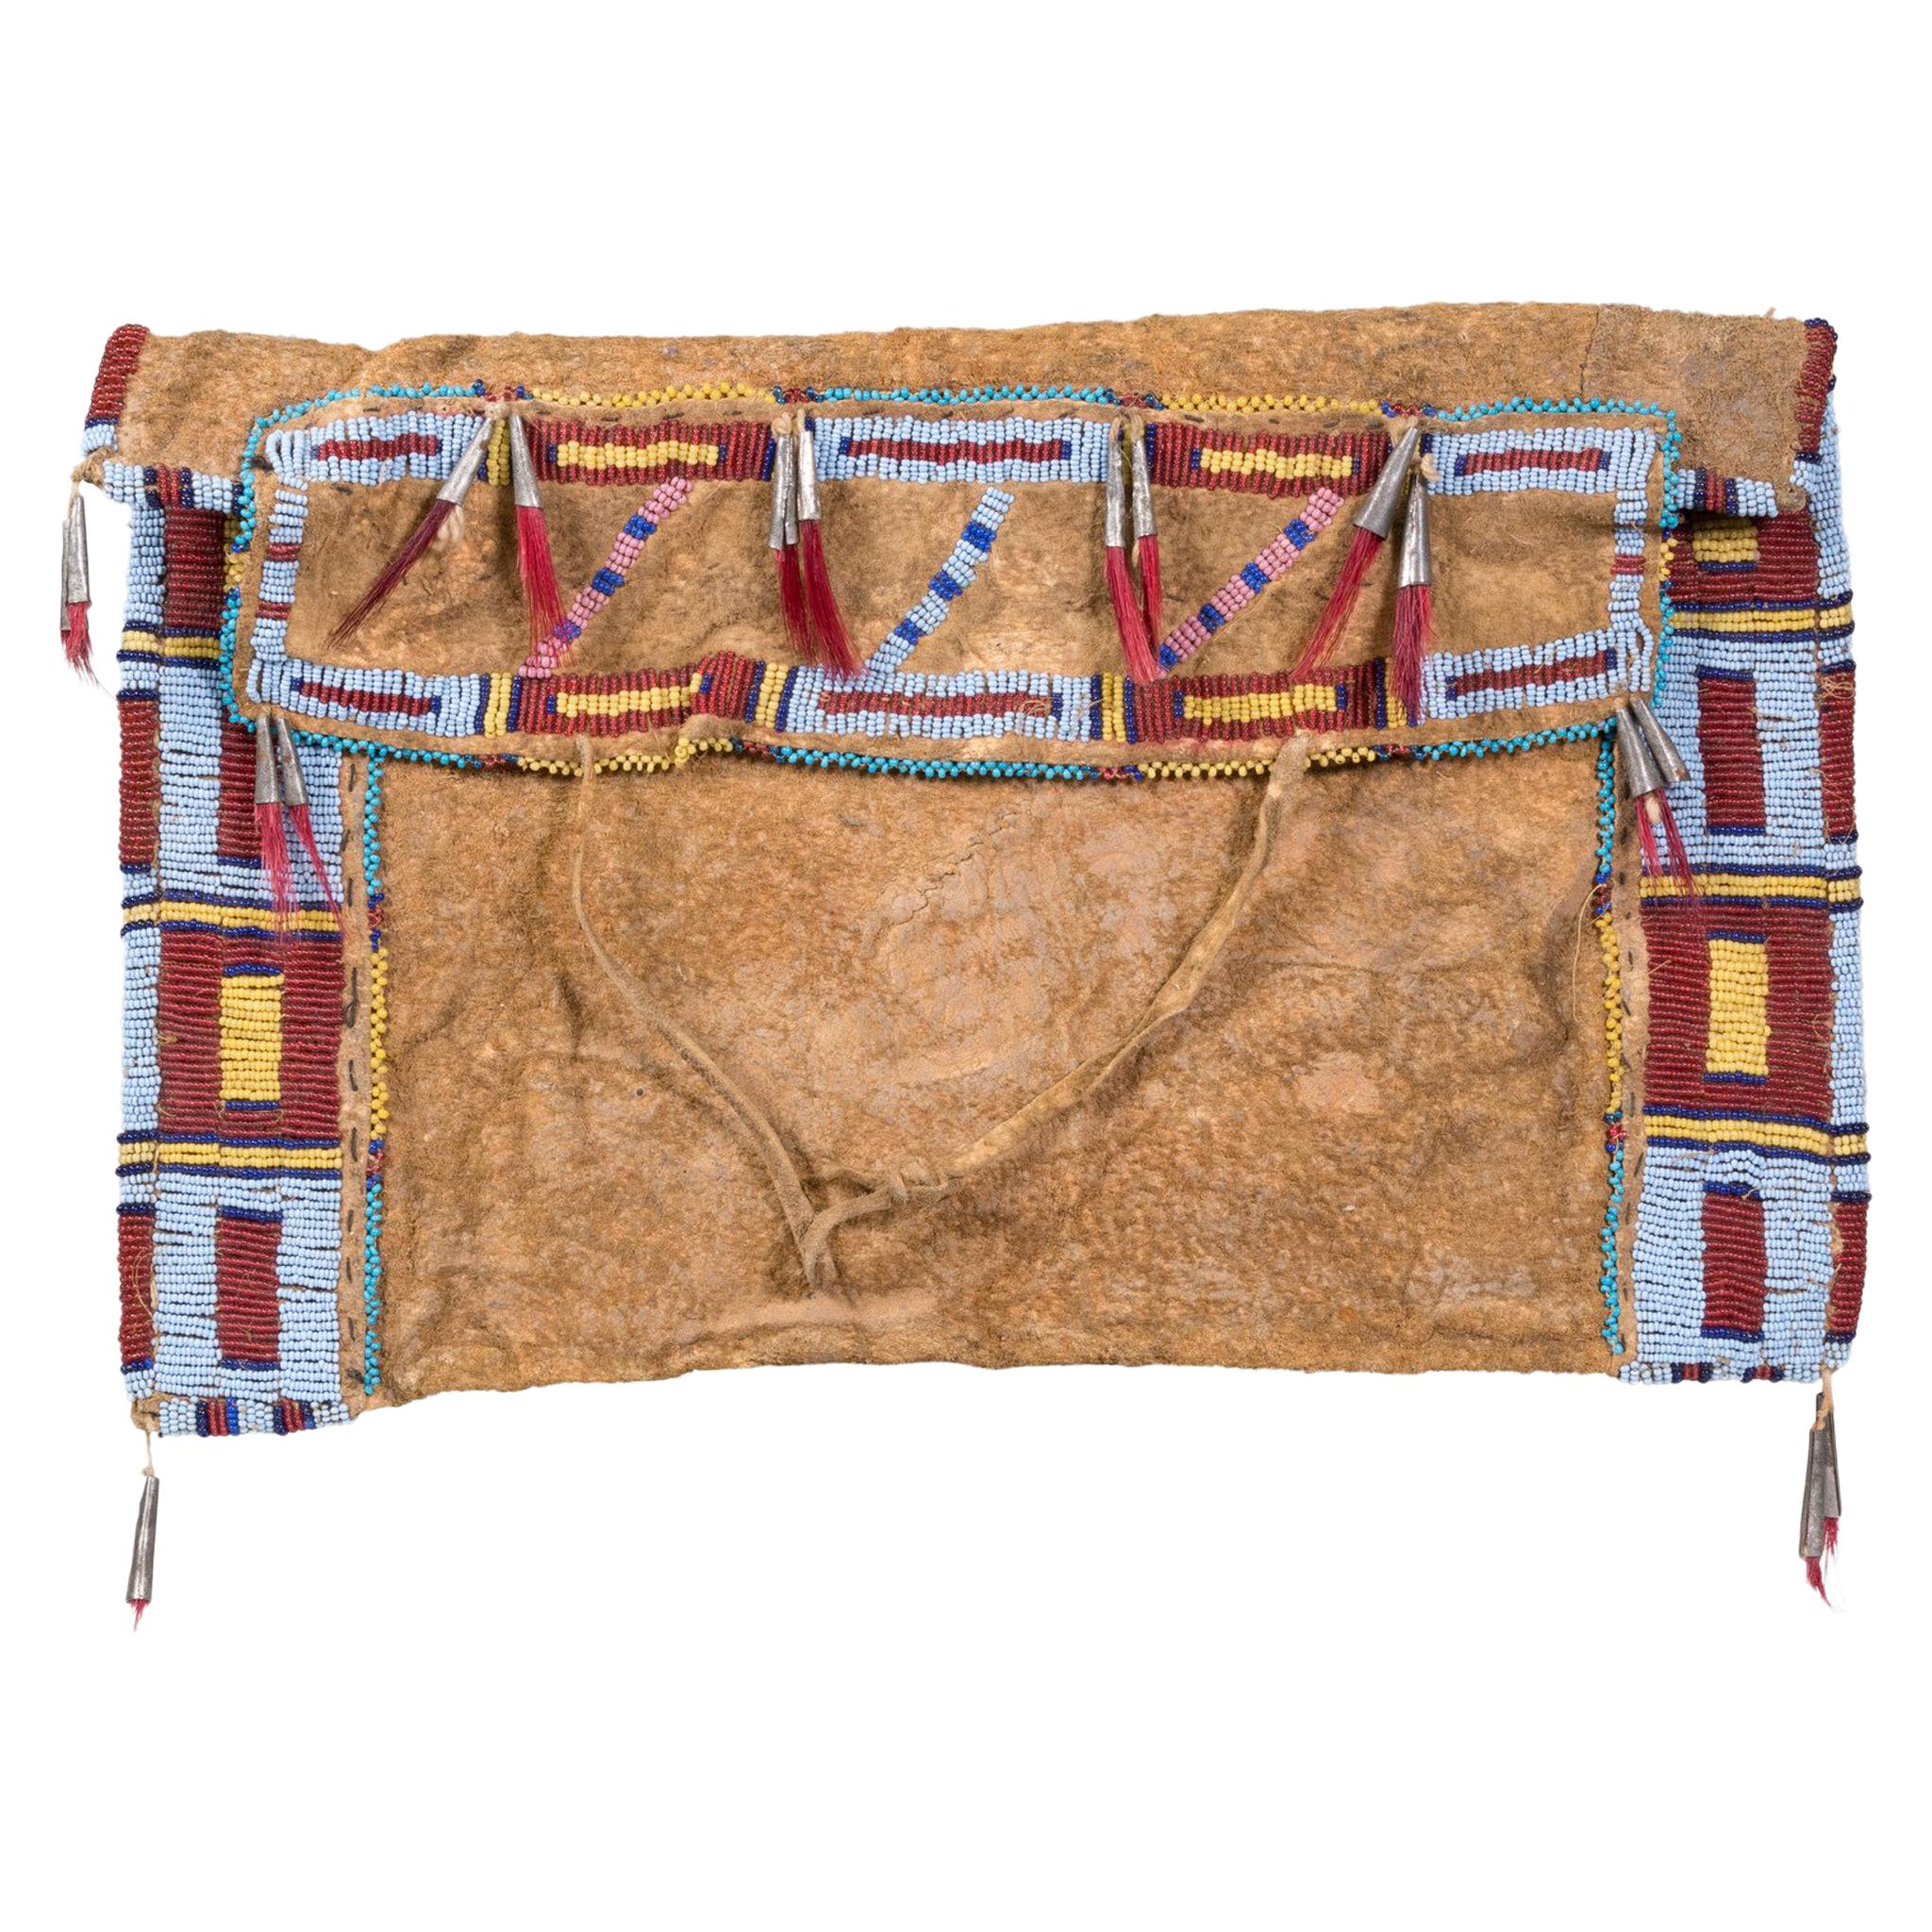 Hidatsa Sioux work bag from Fort Berthold, North Dakota. Properly referred to as a woman's work bag that was used for holding sewing materials, sinew, awls and beads. Sinew sewn on brain tanned buffalo calf skin. Tin cones with horse hair tassels.